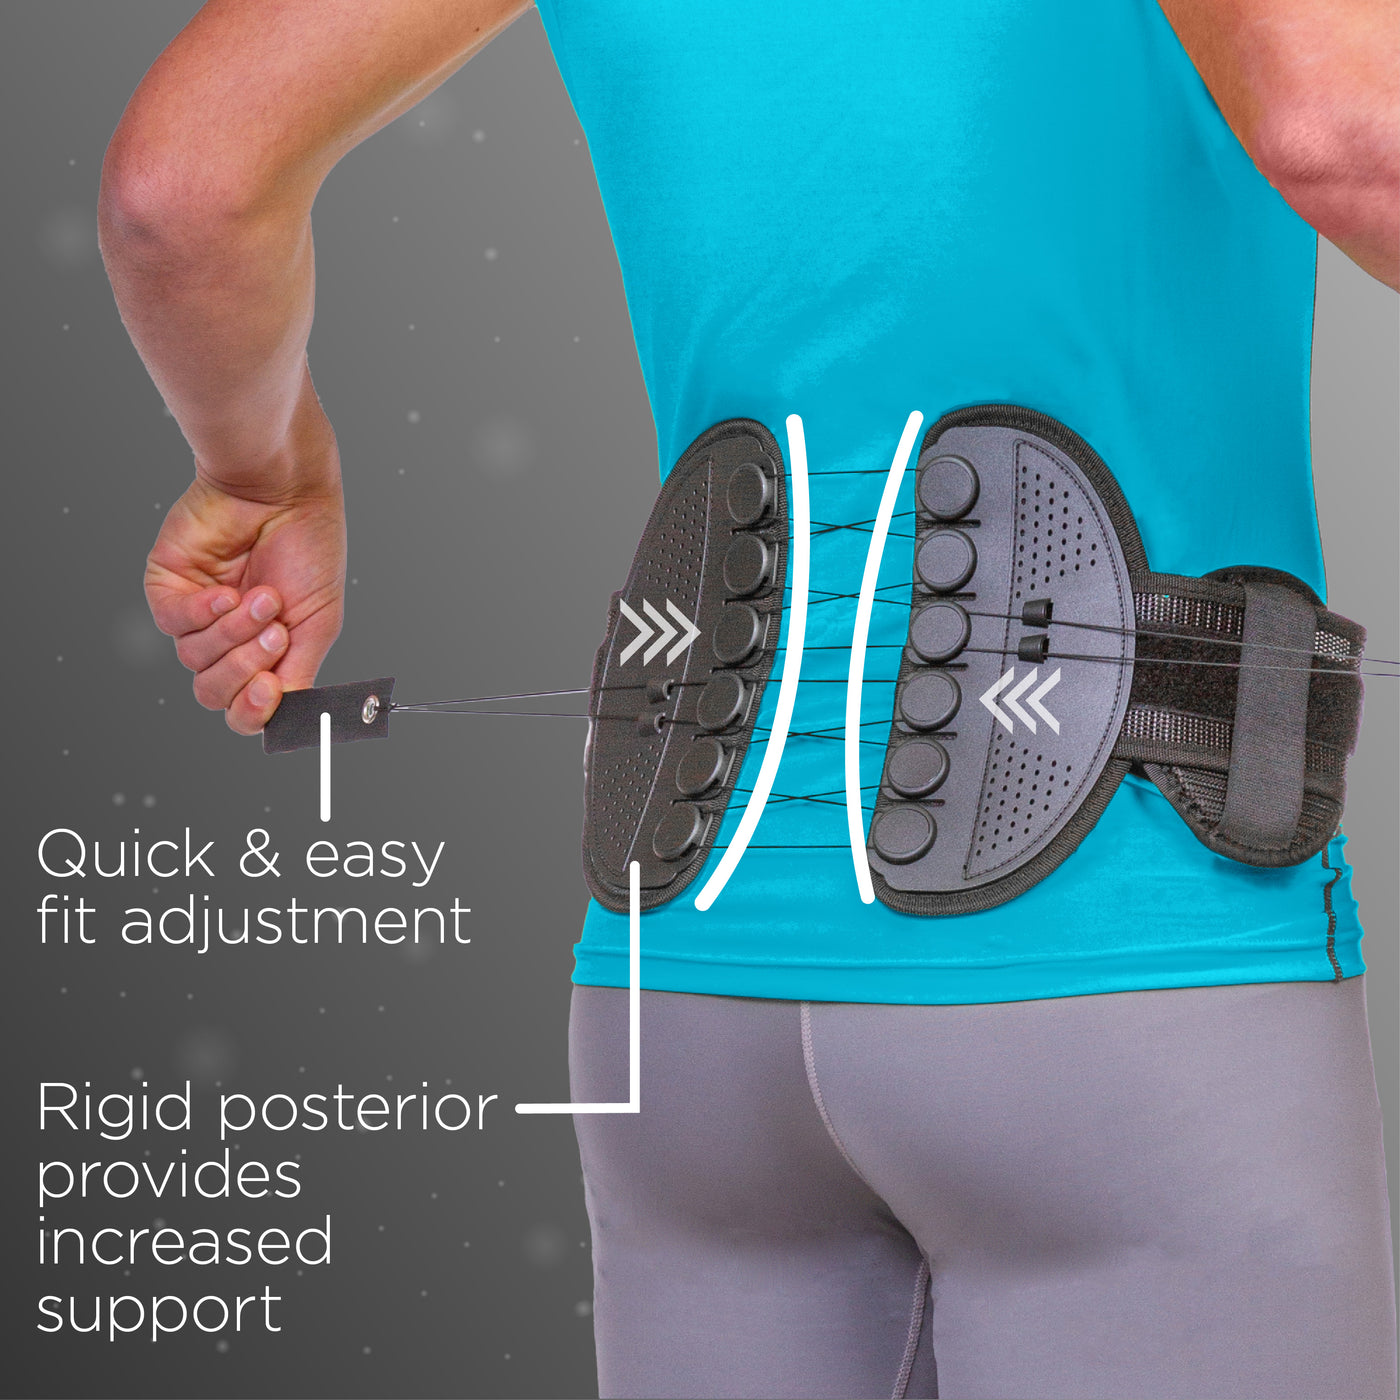 SI joint brace as a one-handed pulley system for quick and easy fit adjustment